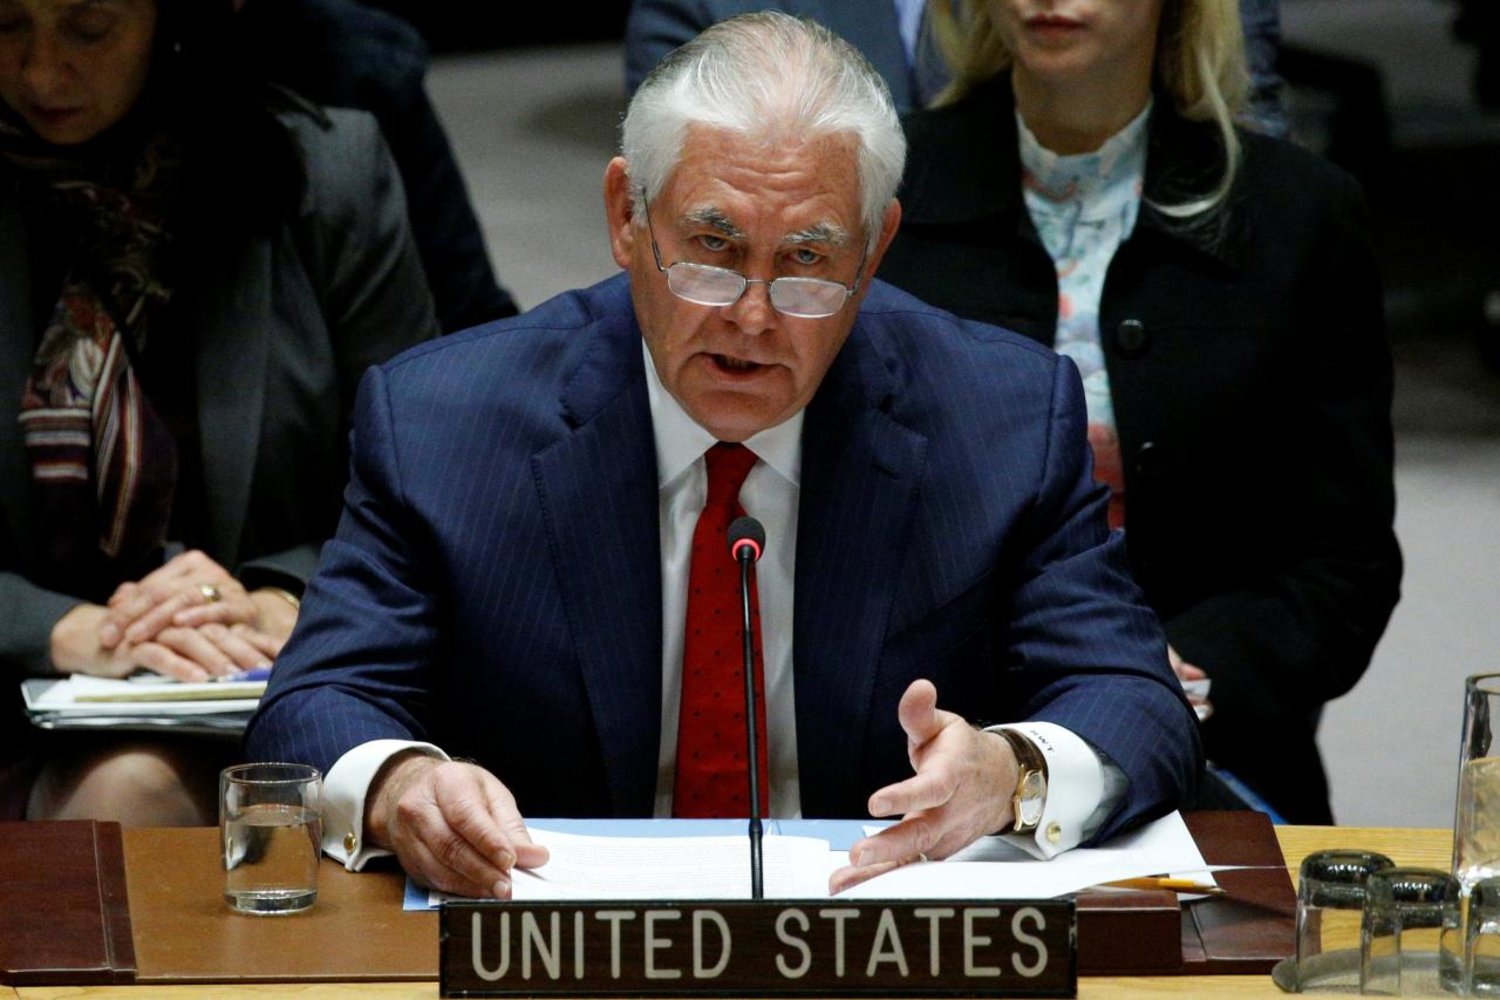 US Secretary of State Rex Tillerson speaks during a United Nations Security Council meeting, to discuss a North Korean missile program. (Reuters)